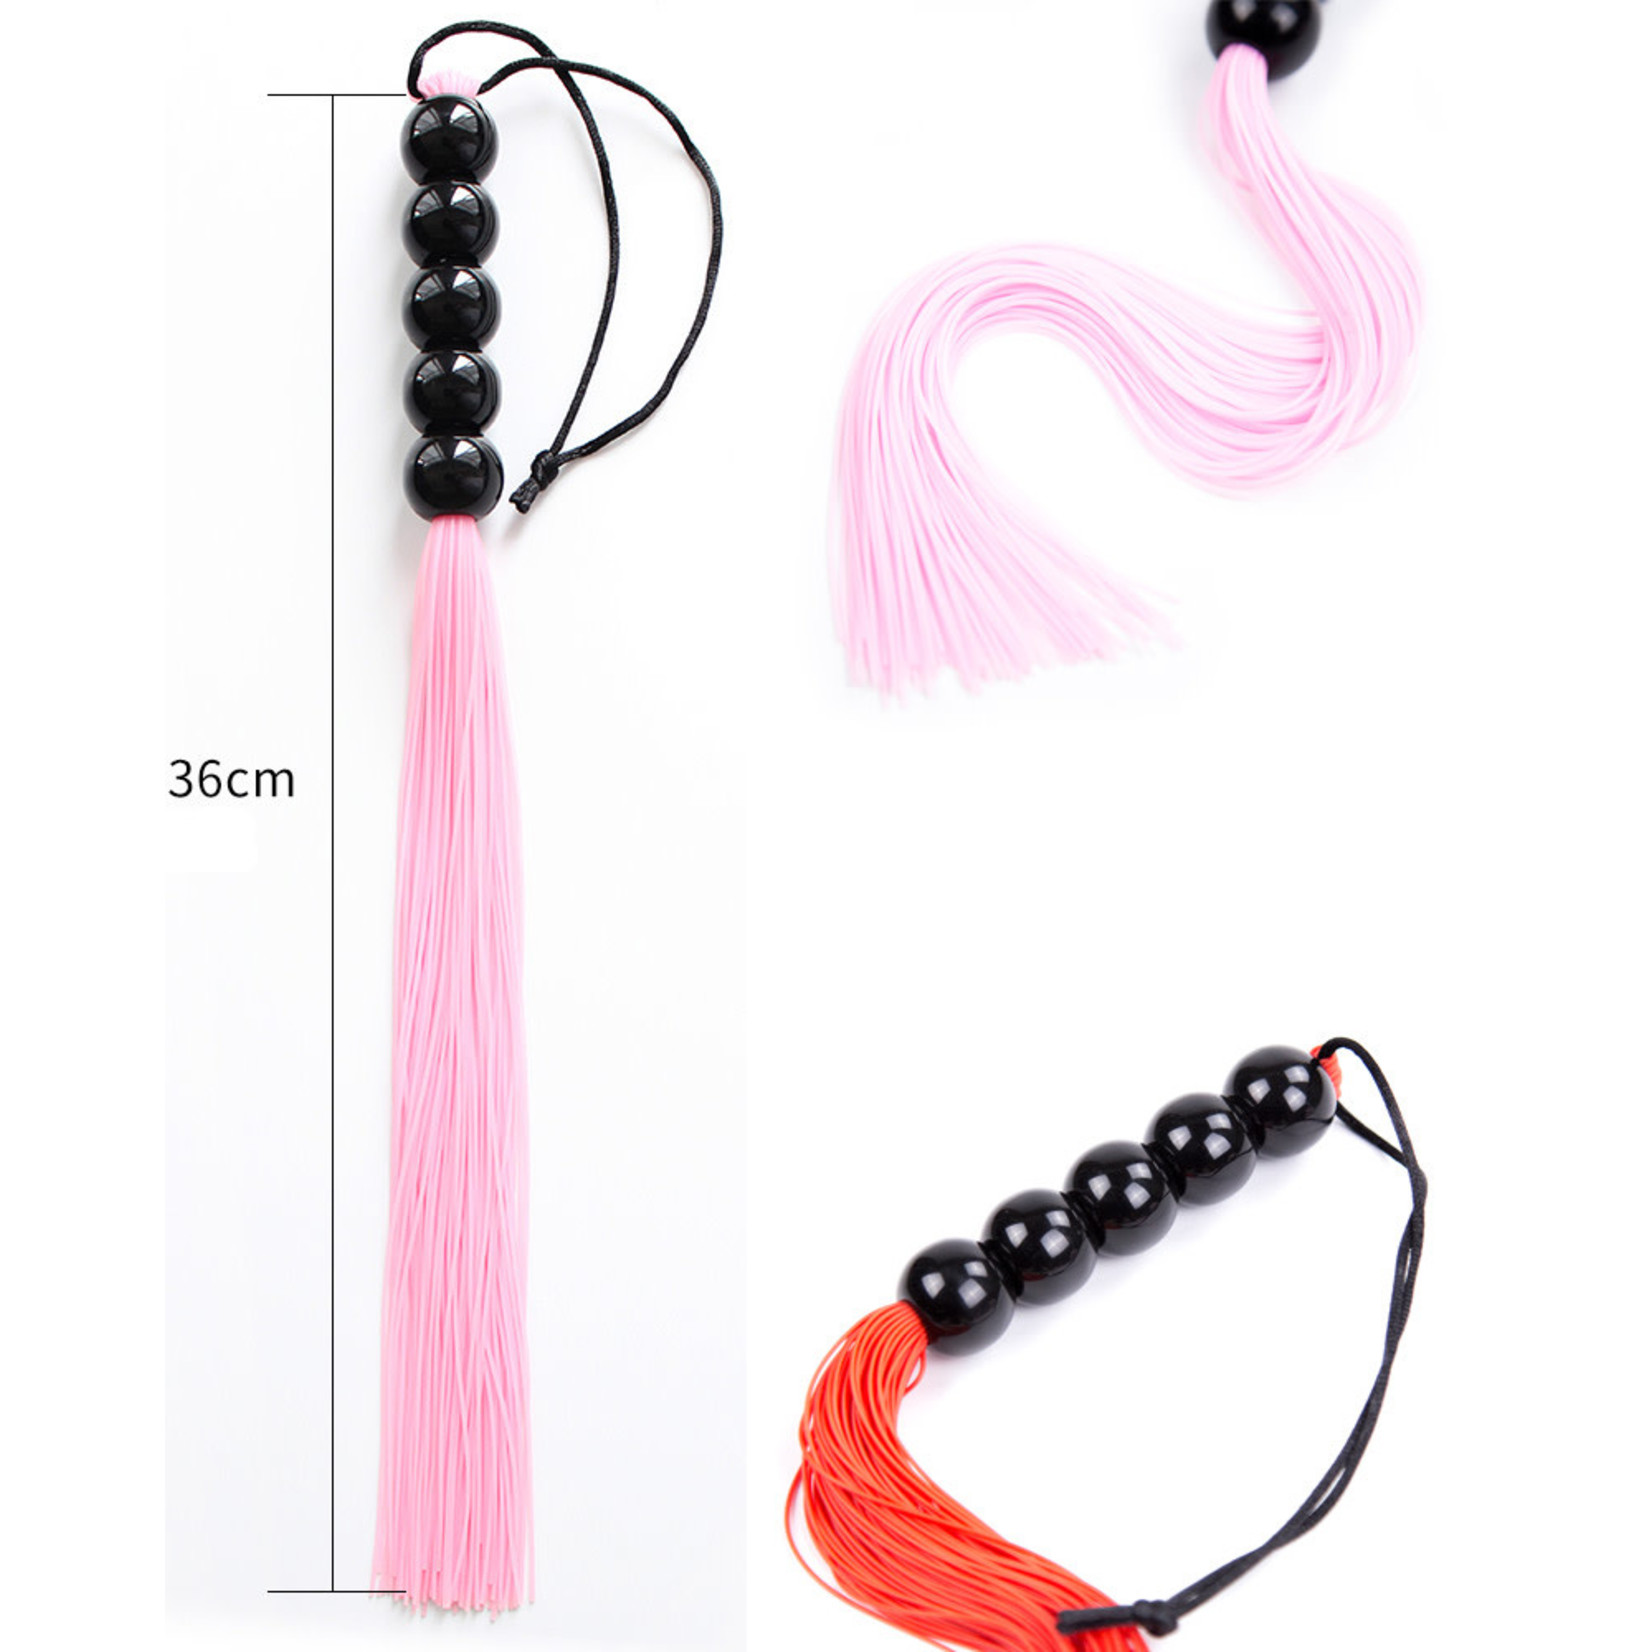 SILICONE WHIP WITH BEAD HANDLE PINK